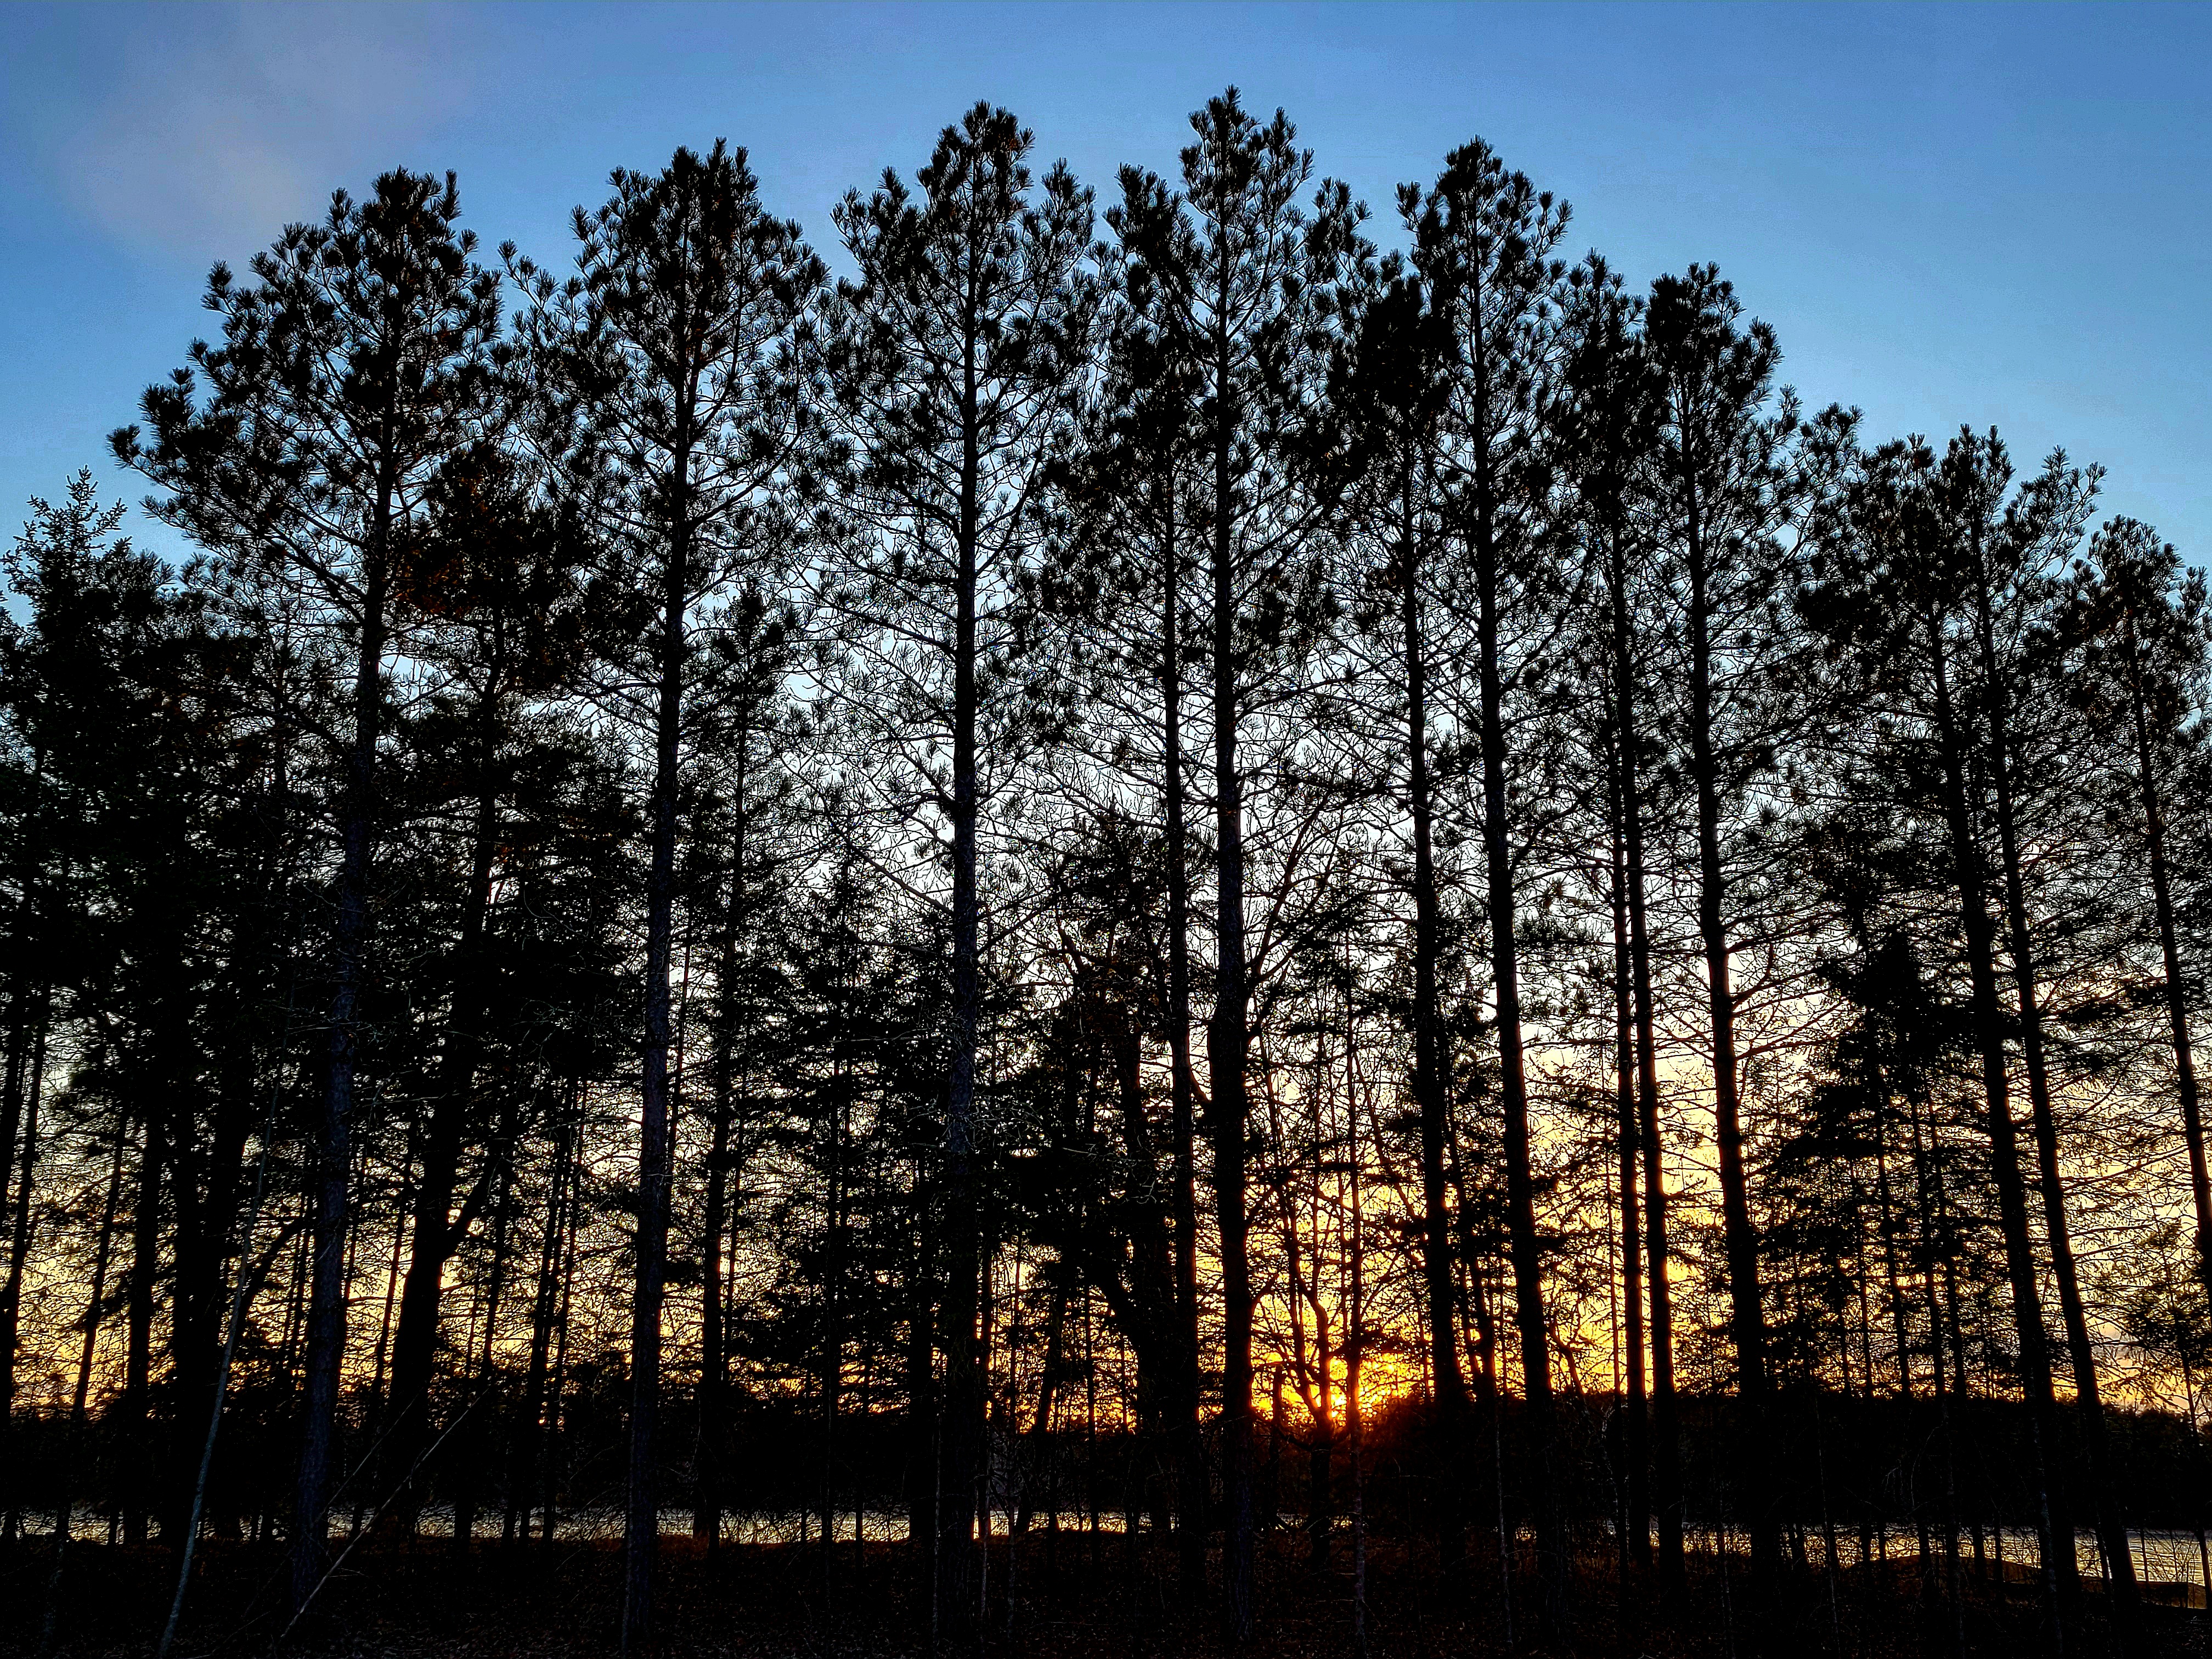 Pine trees at Itasca with a sunset in the background